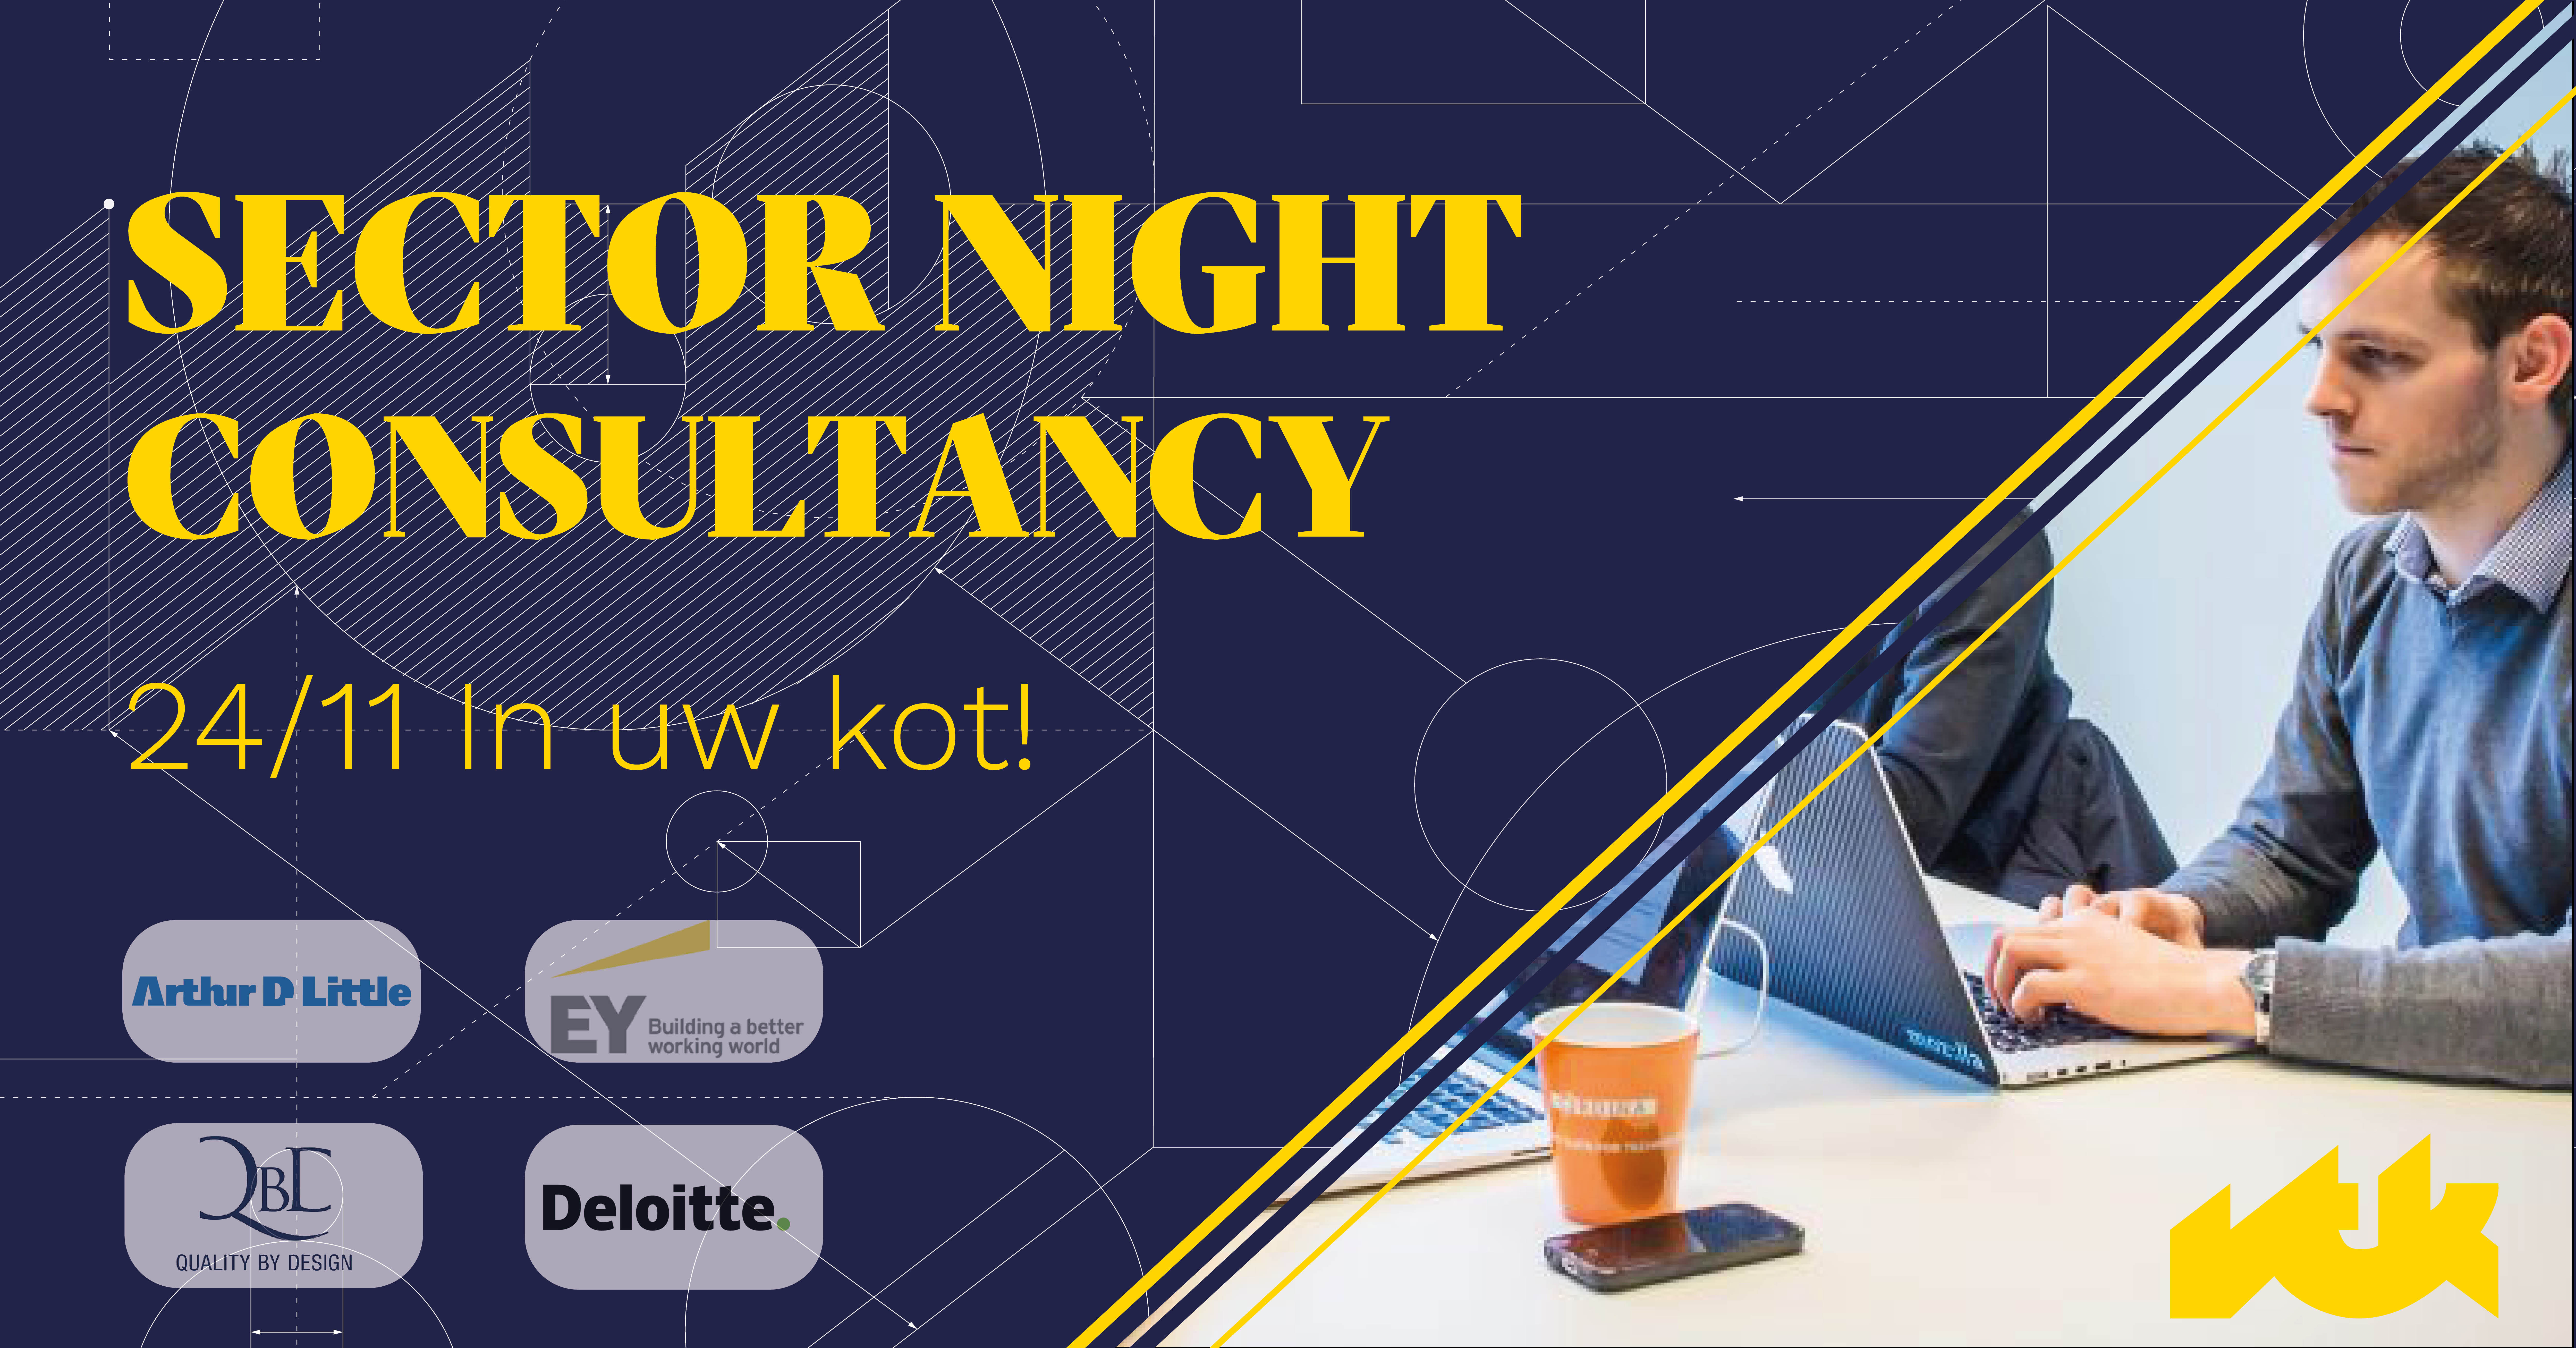 Sector Night Consultancy